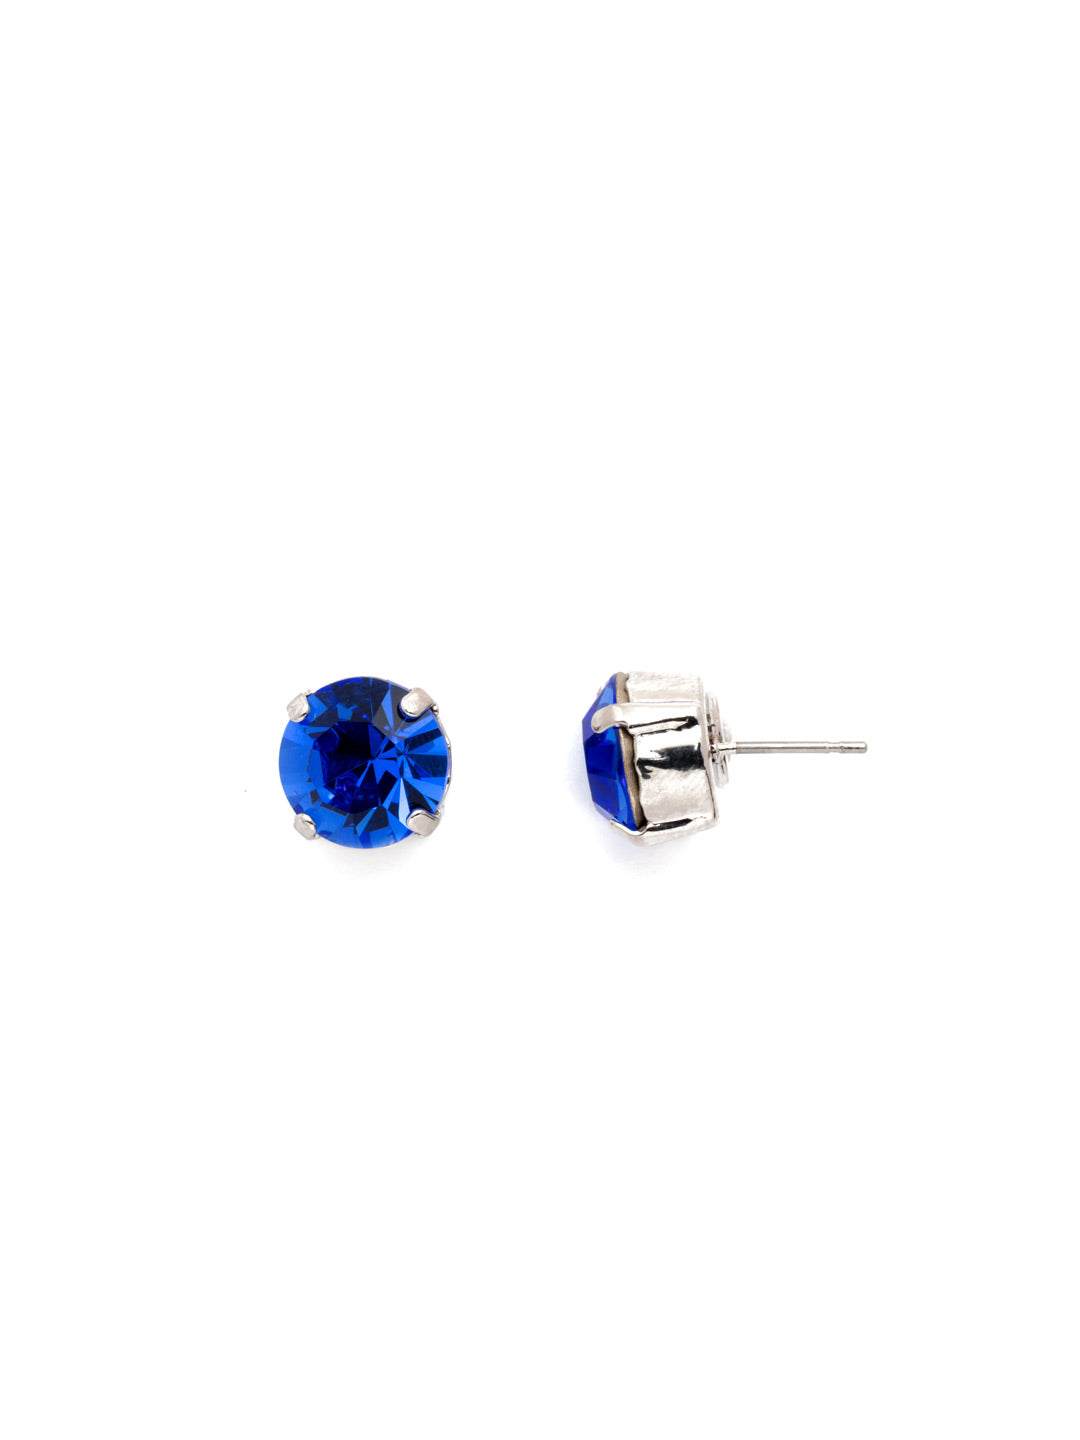 London Stud Earrings - ECM14RHSAP - <p>Everyone needs a great pair of studs. Add some classic sparkle to any occasion with these stud earrings. From Sorrelli's Sapphire collection in our Palladium Silver-tone finish.</p>